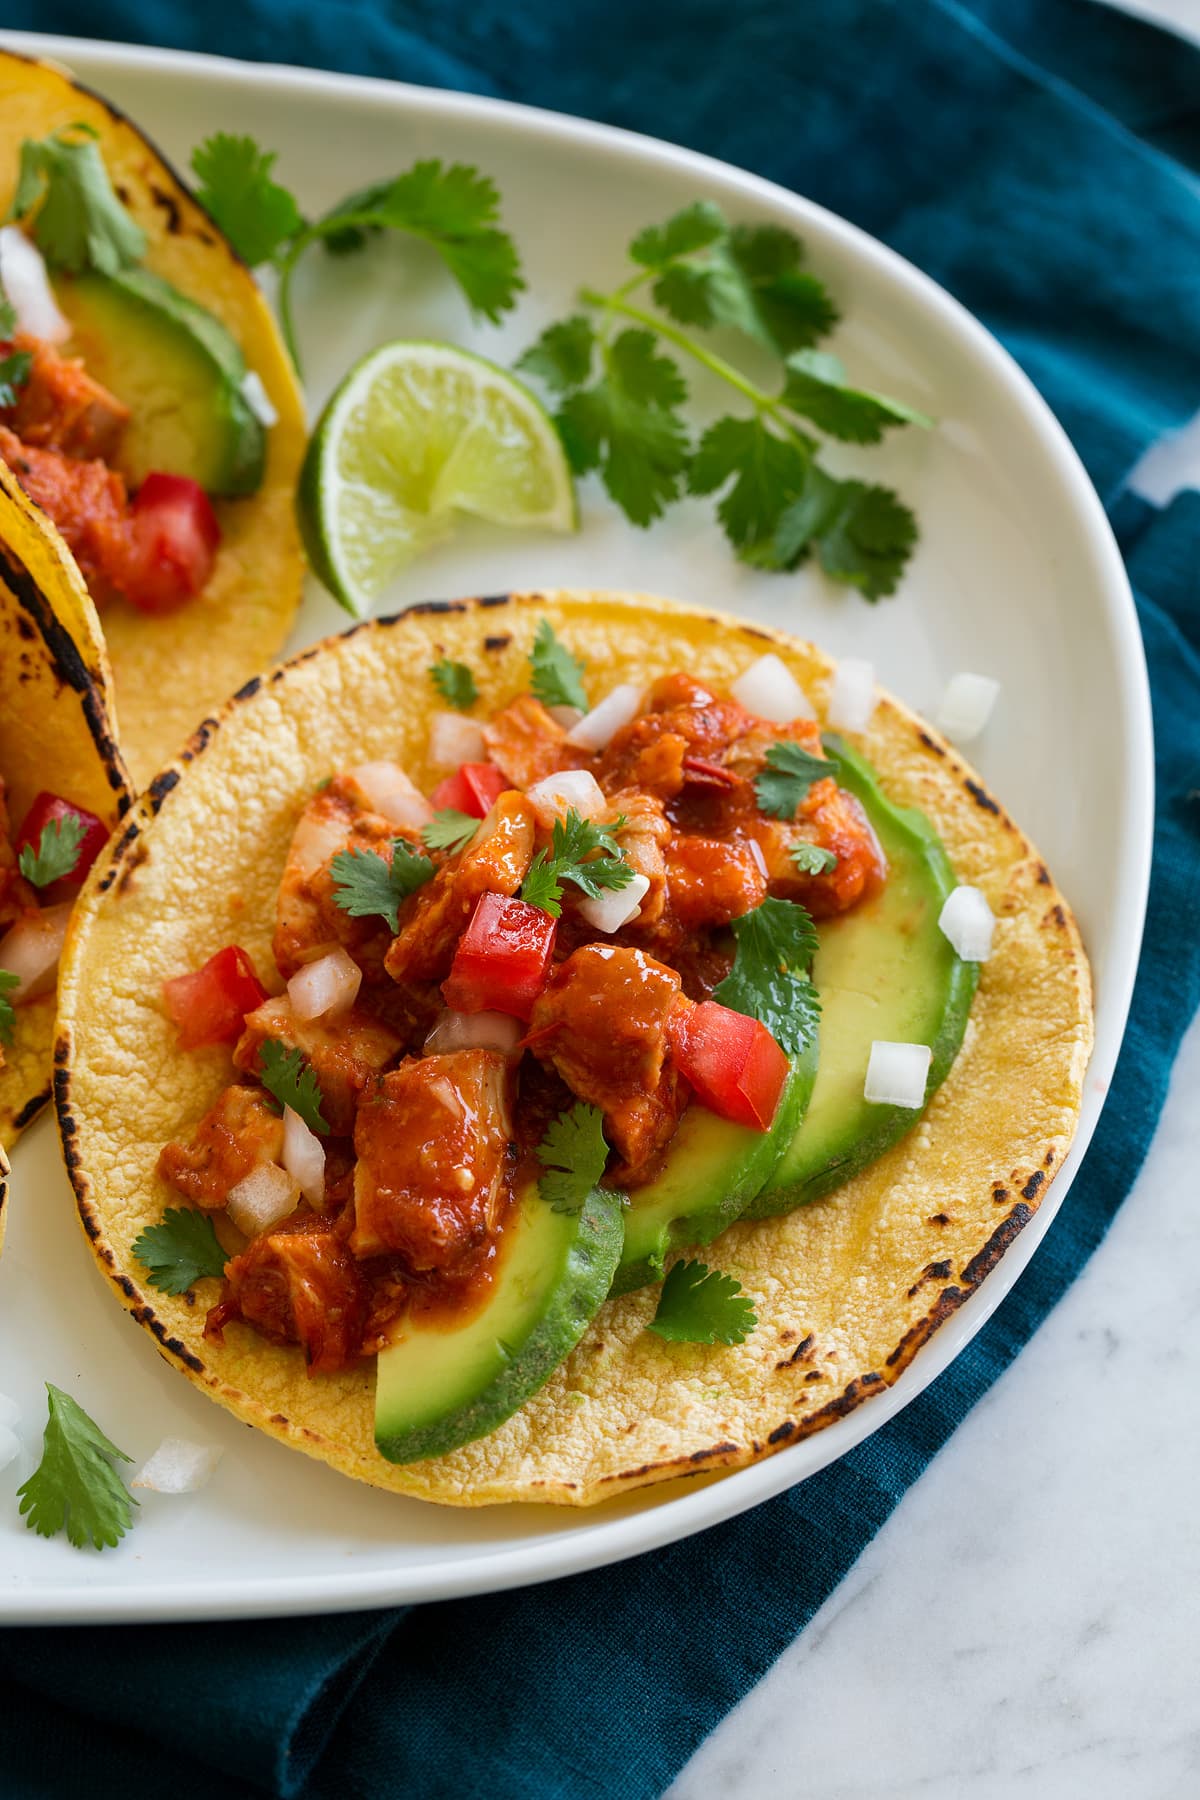 Chicken tinga served in a corn tortilla garnished with pico de gallo and avocado slices. 